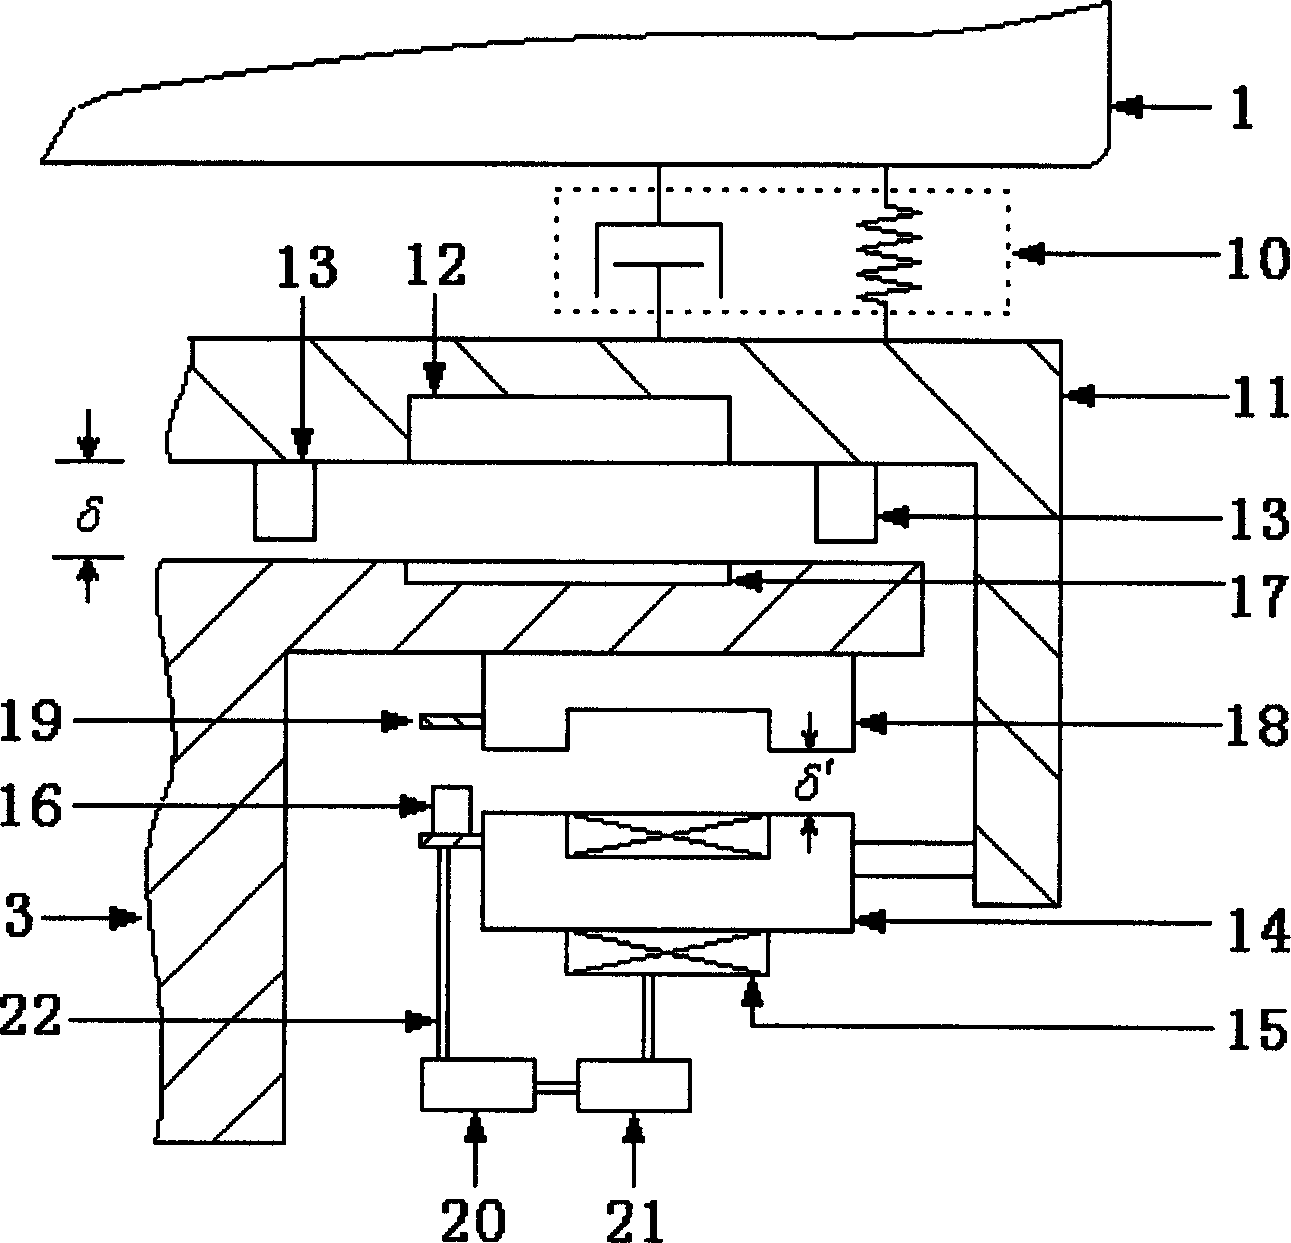 Electric electromagnetic hybrid suspension system